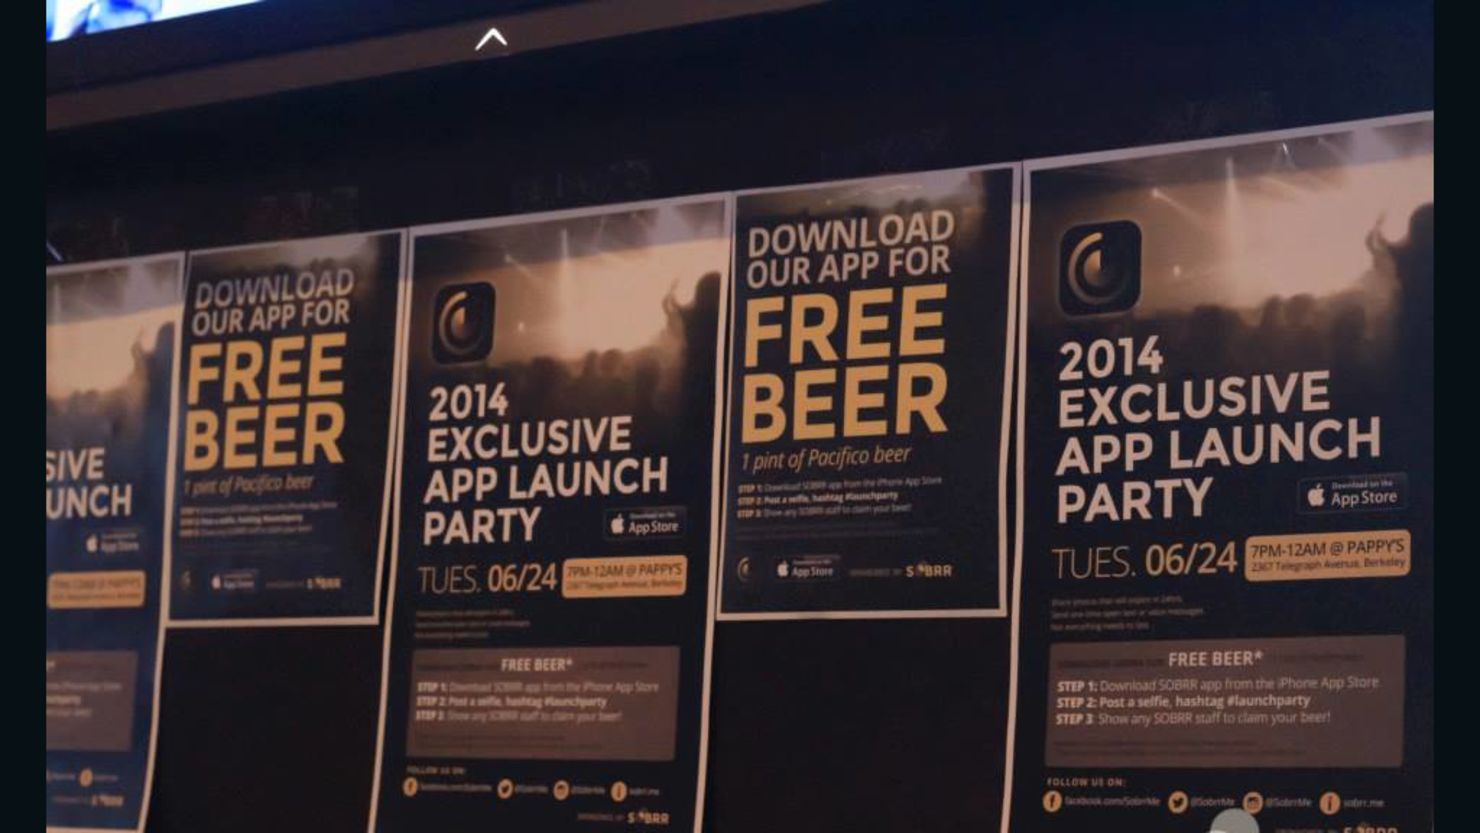 Sobrr's launch party in June offered free beer, appropriate for an app that helps hide the evidence of users' wild nights out.